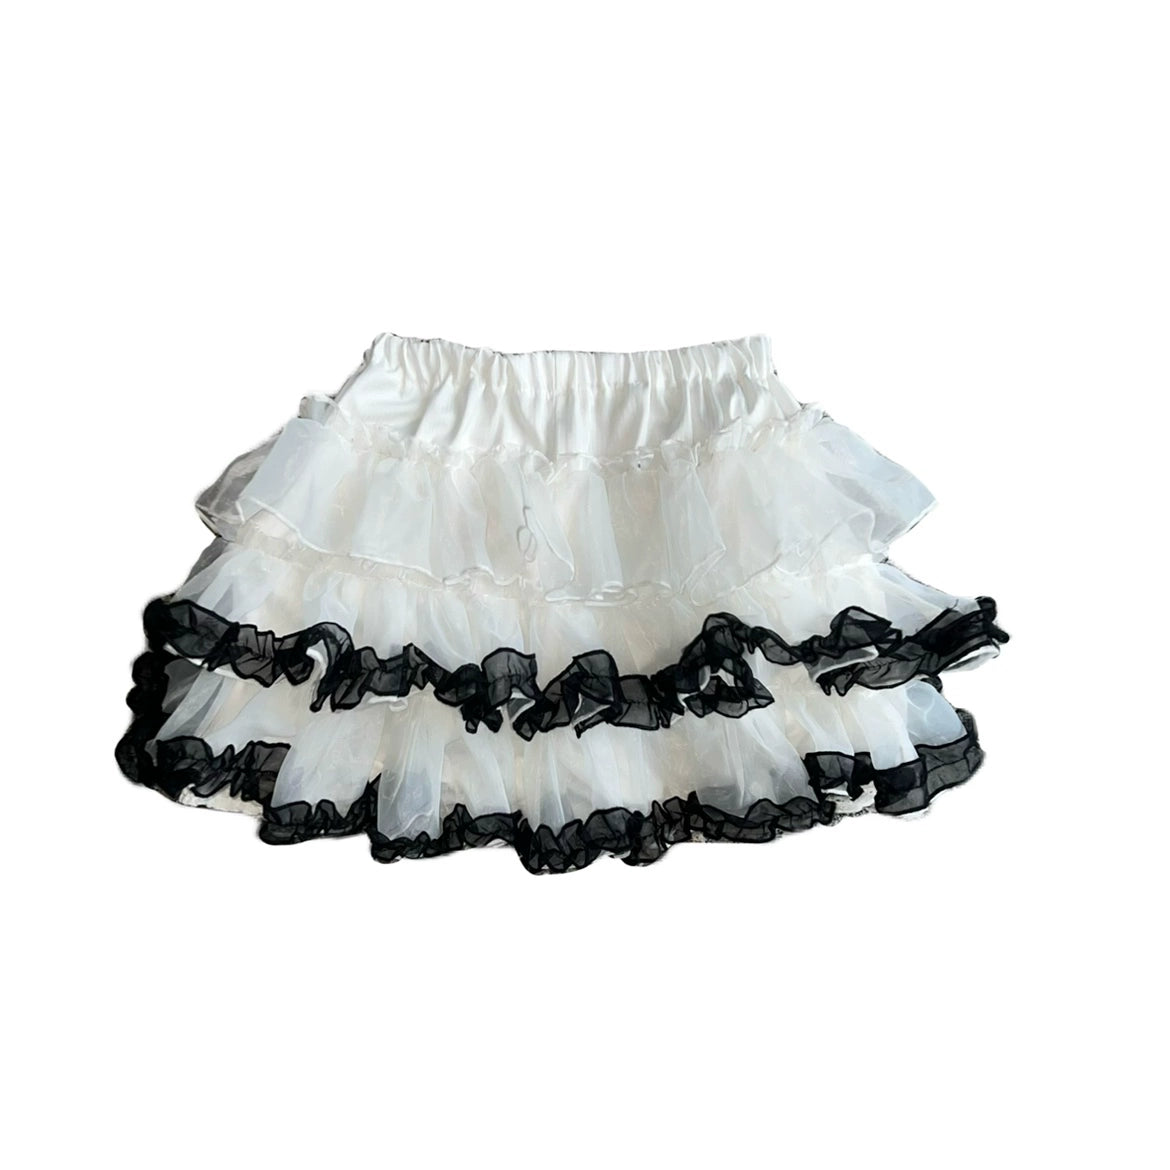 Subculture Skirt Black White Bloomers 36592:561186